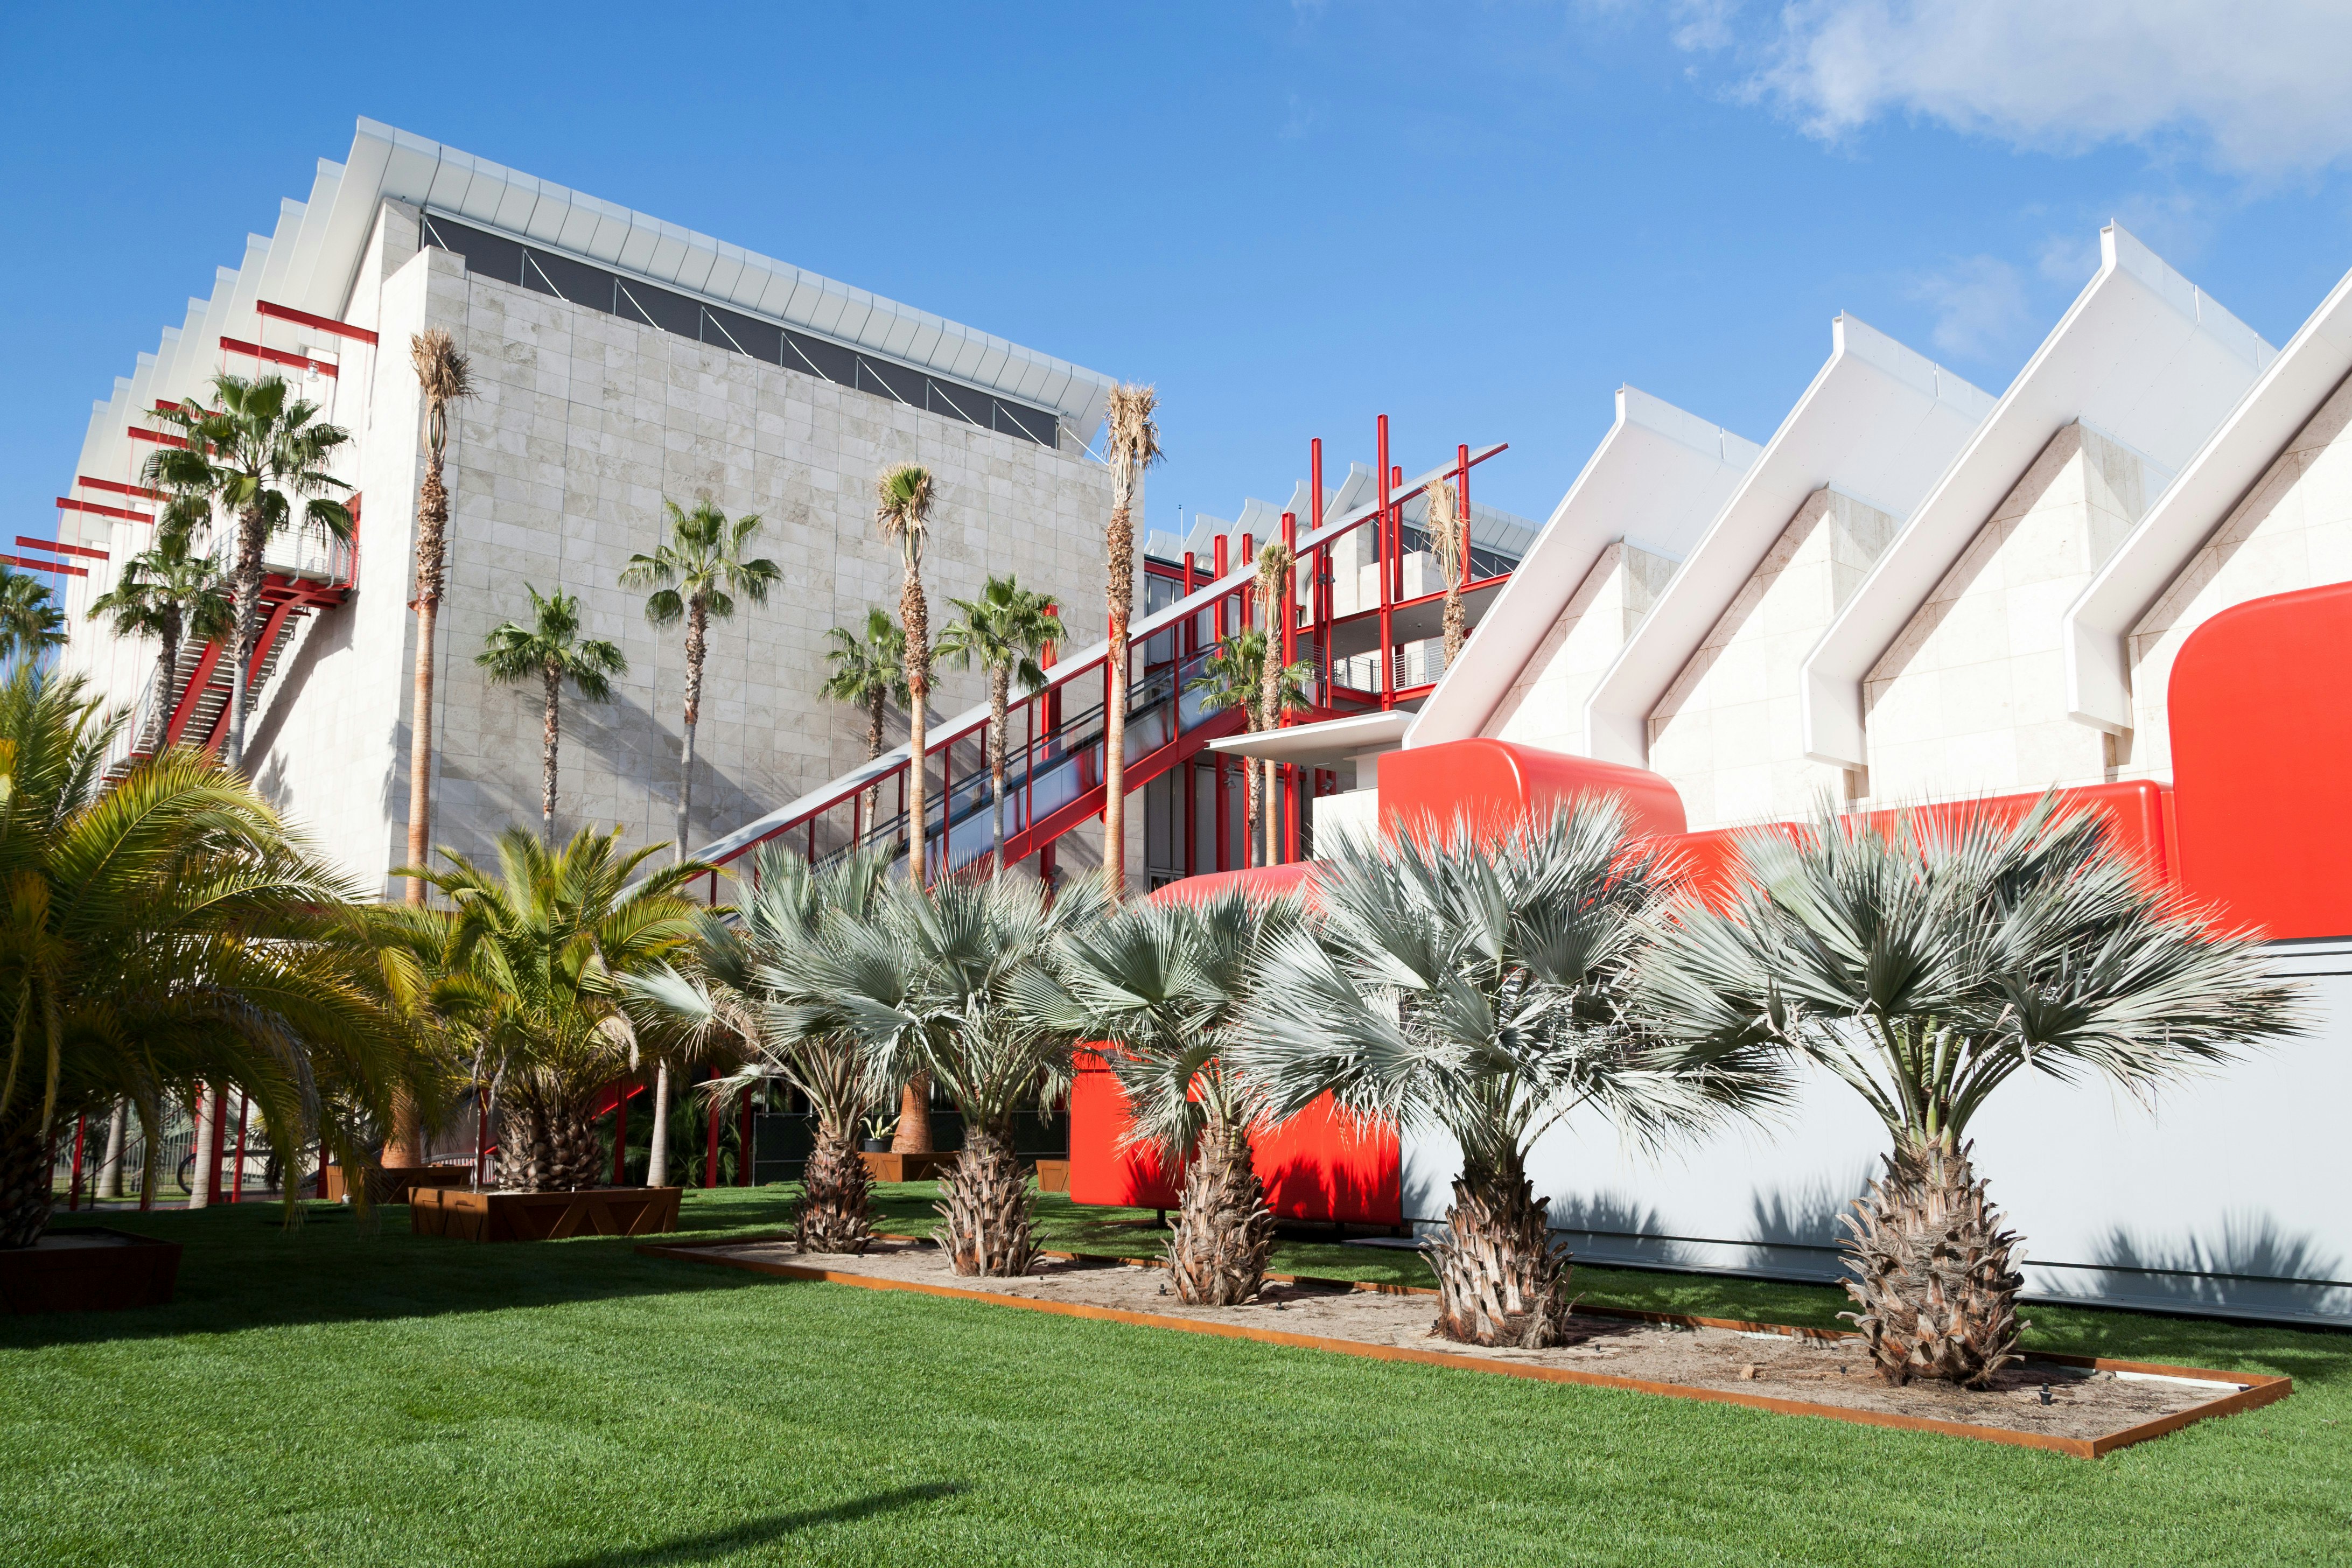 A photograph of a white building with red accents and palm trees surrounding it.